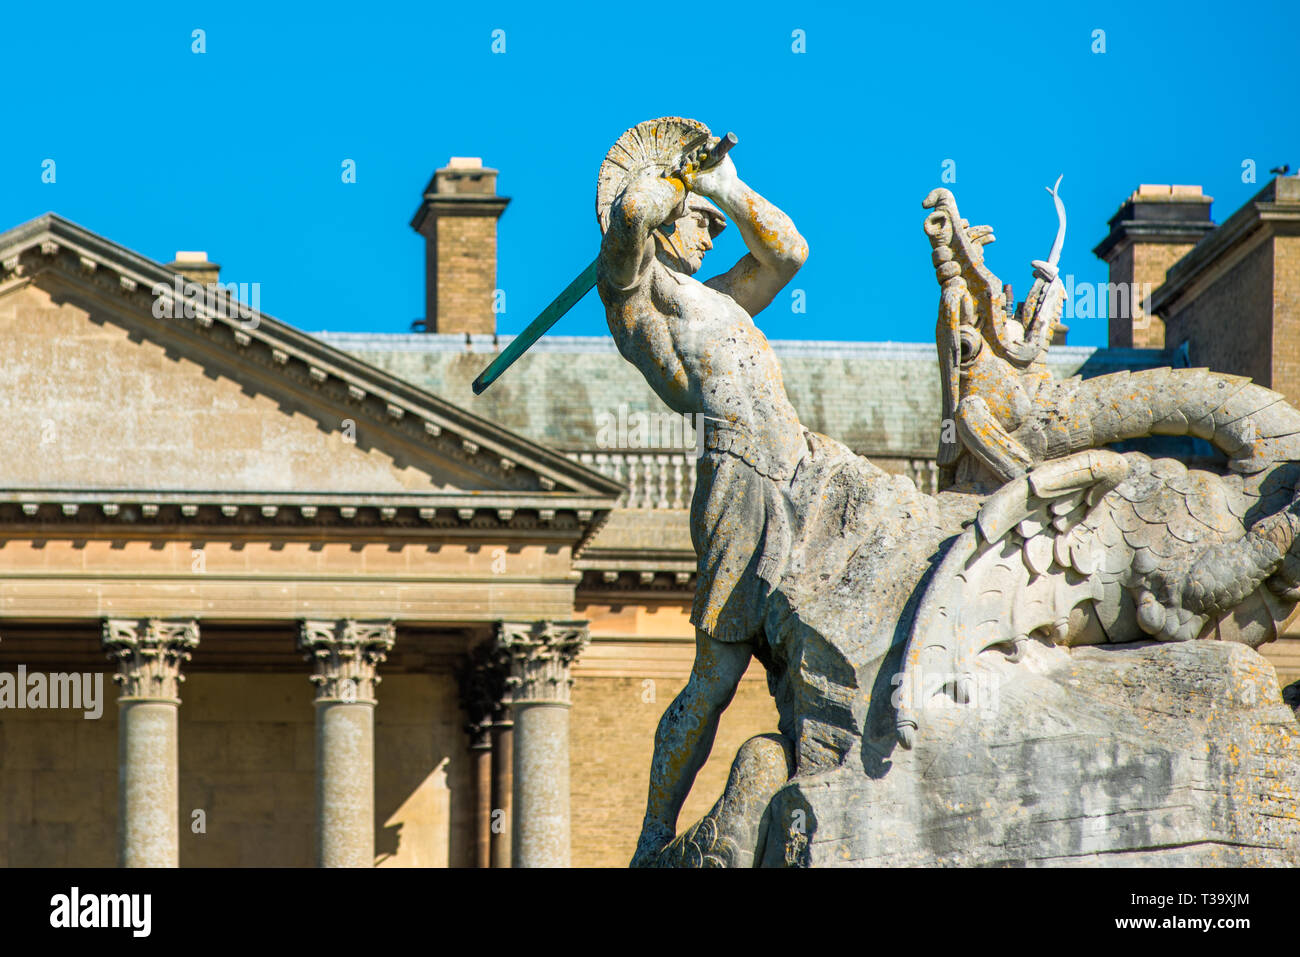 Holkham hall Stately home in North Norfolk, East Anglia, England, UK Stock Photo